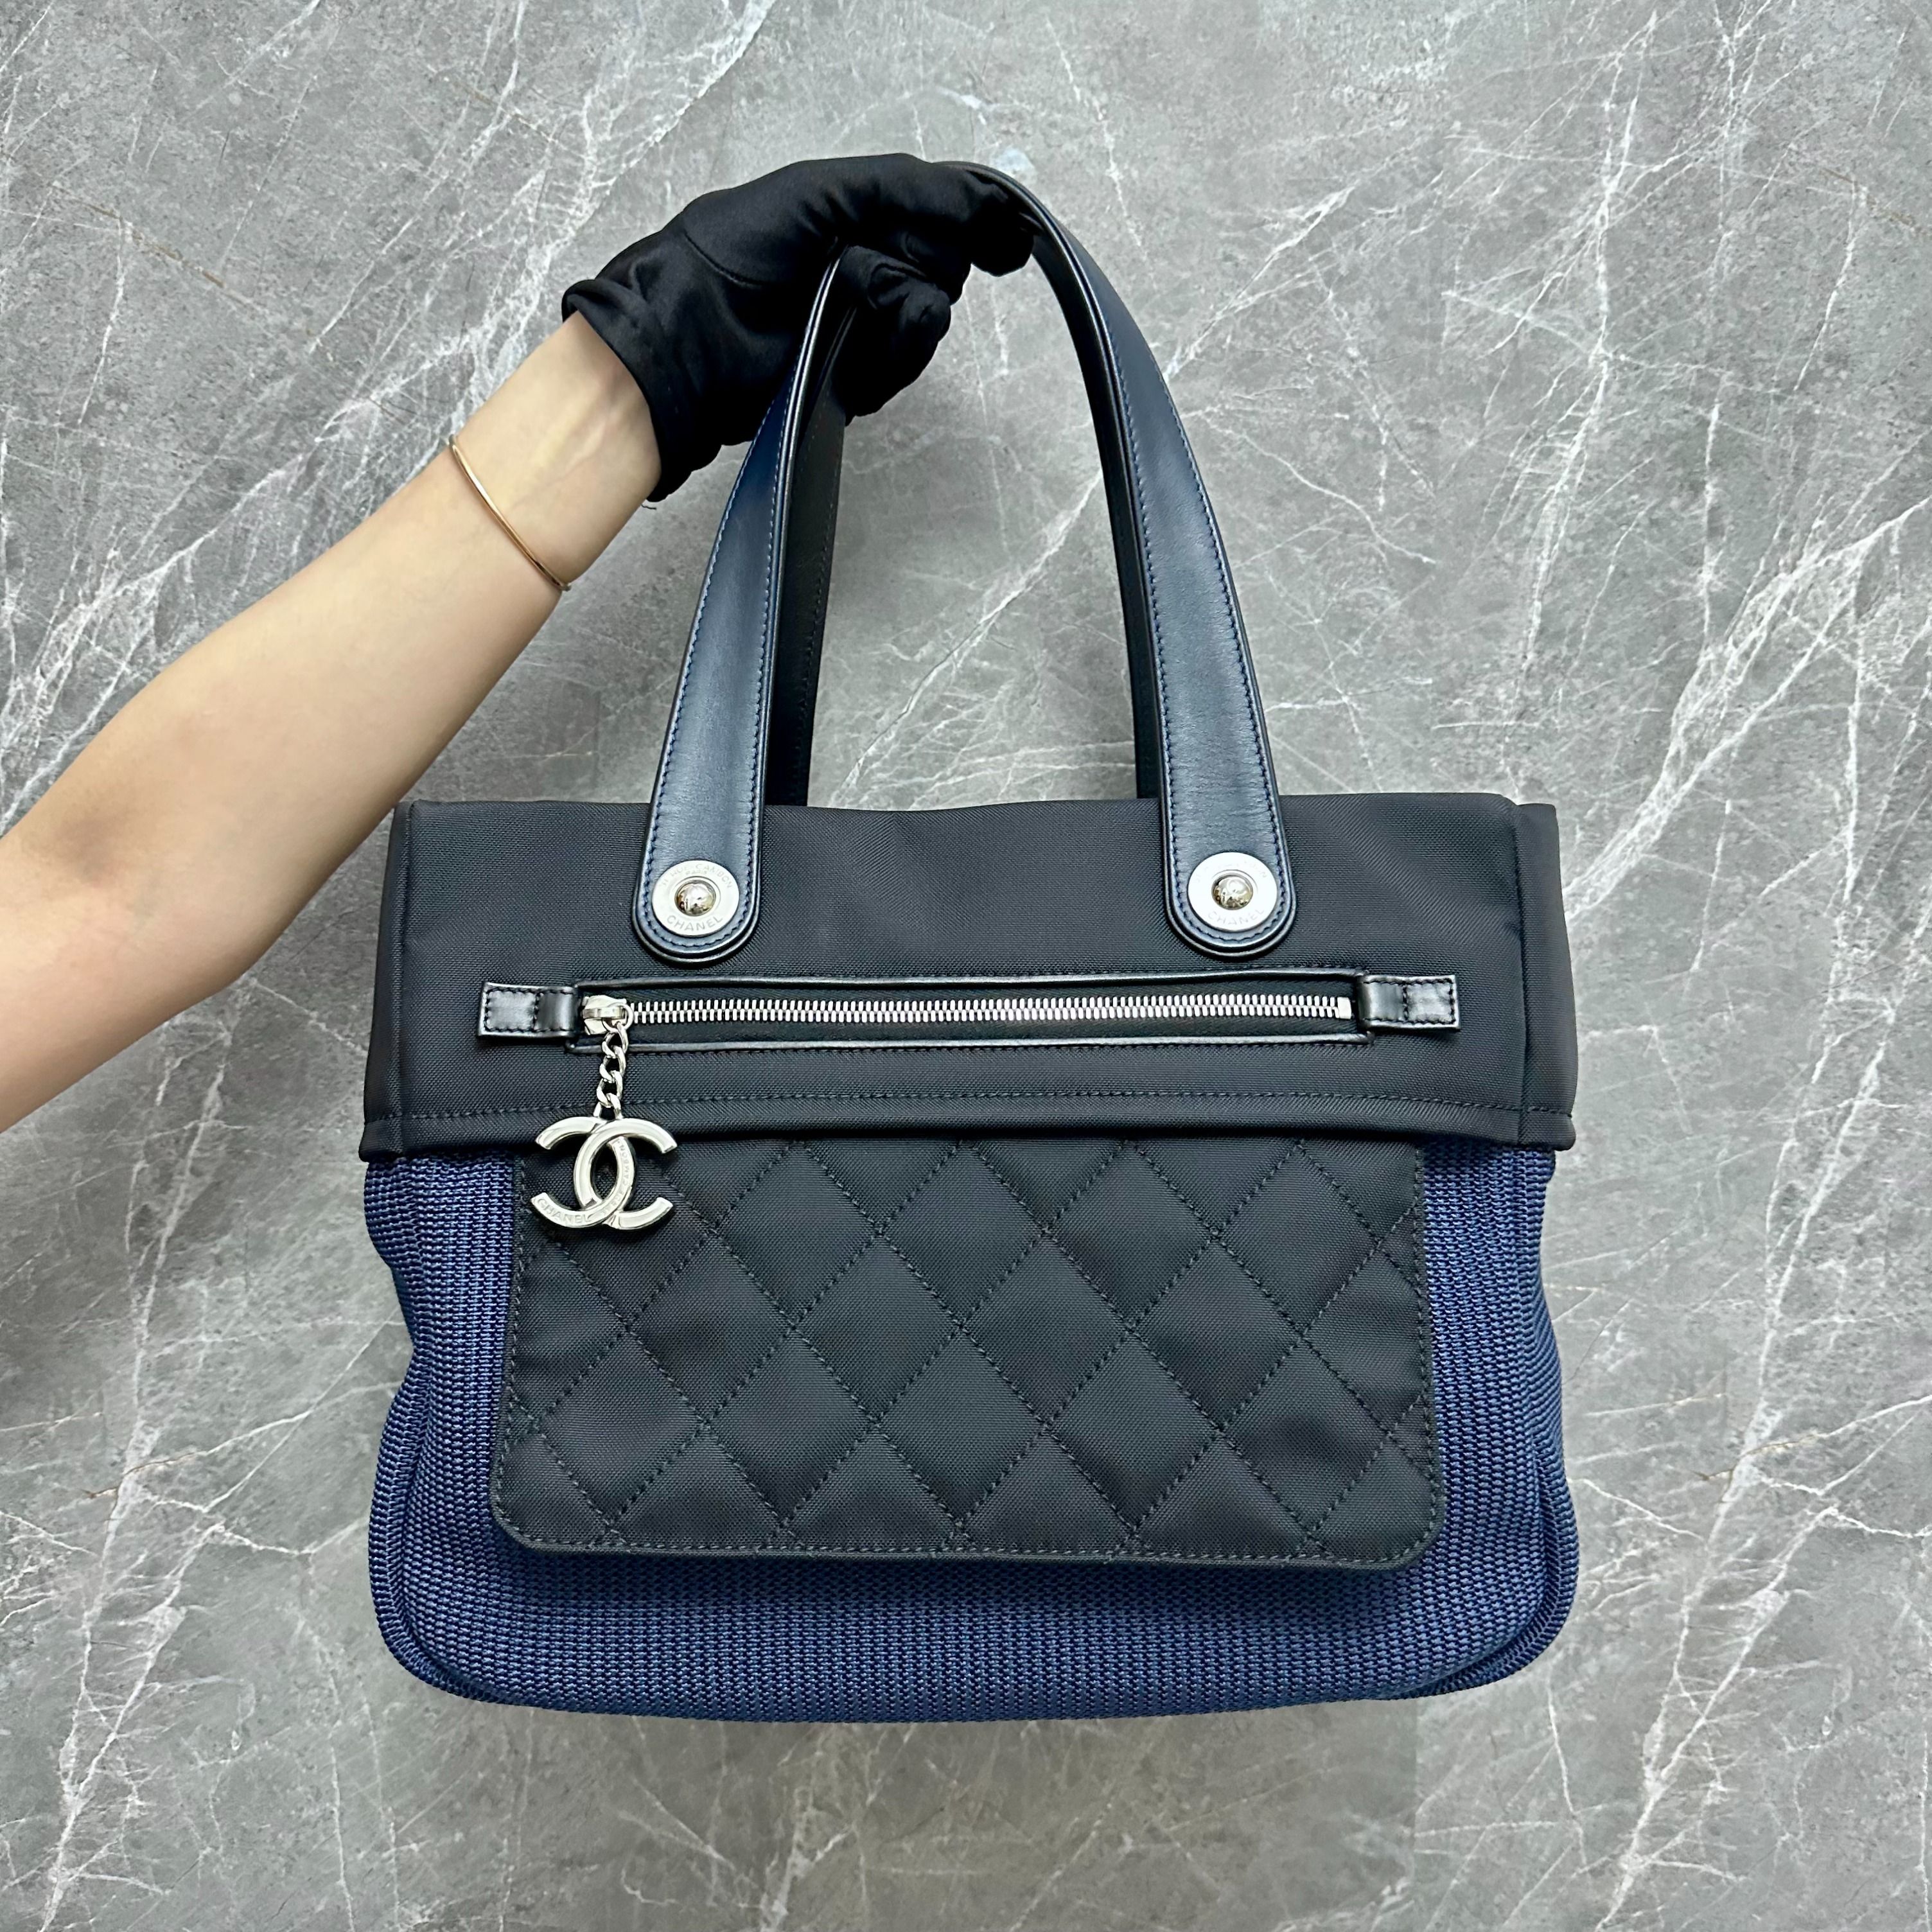 Chanel Large deauville Tote bag Denim Navy SHW